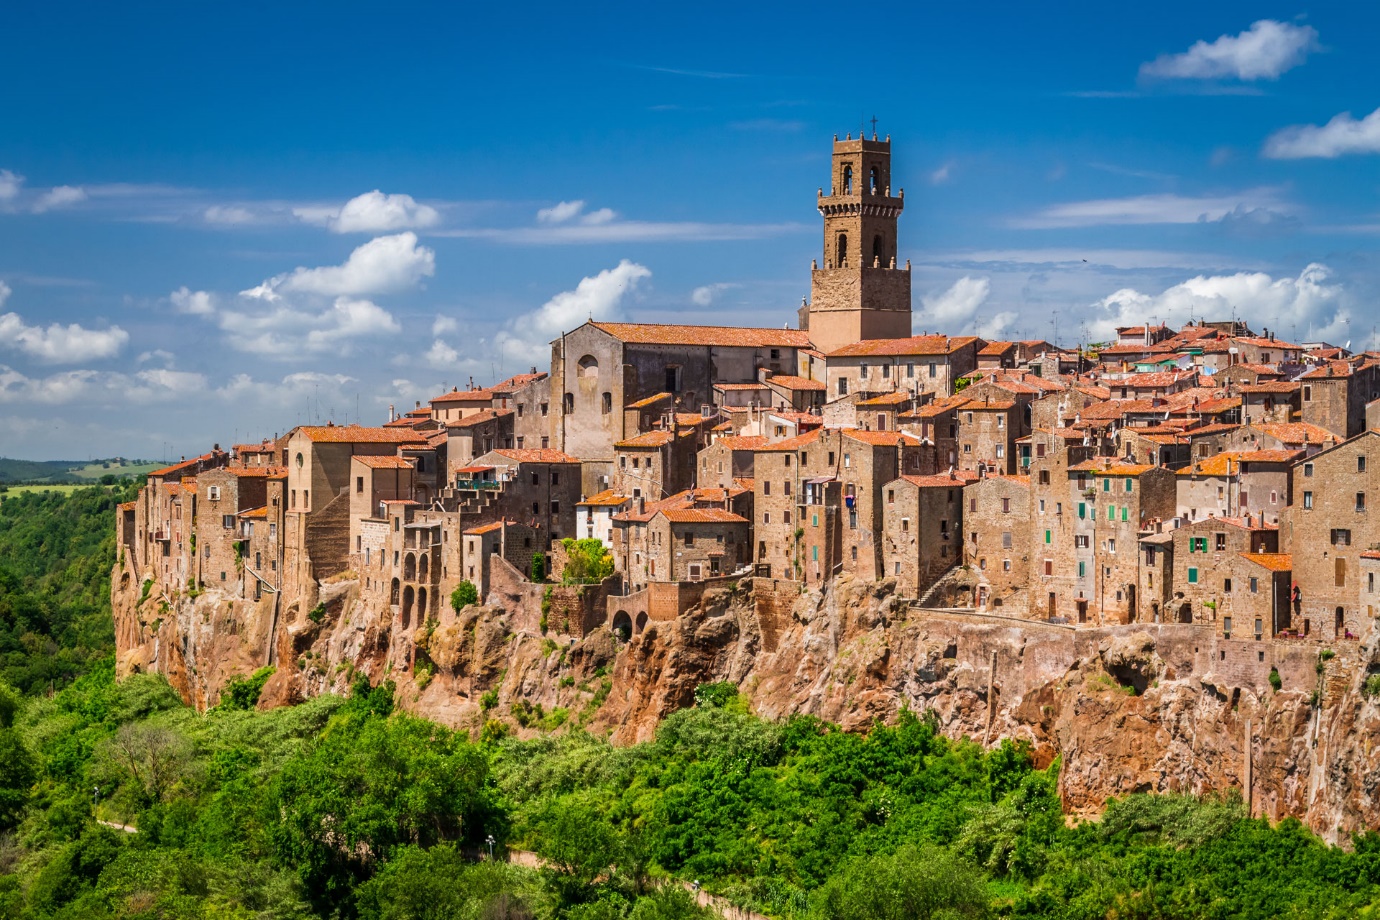 Aerial view of Pitigliano, a historic Tuscan town known as "Little Jerusalem" | Wedifys